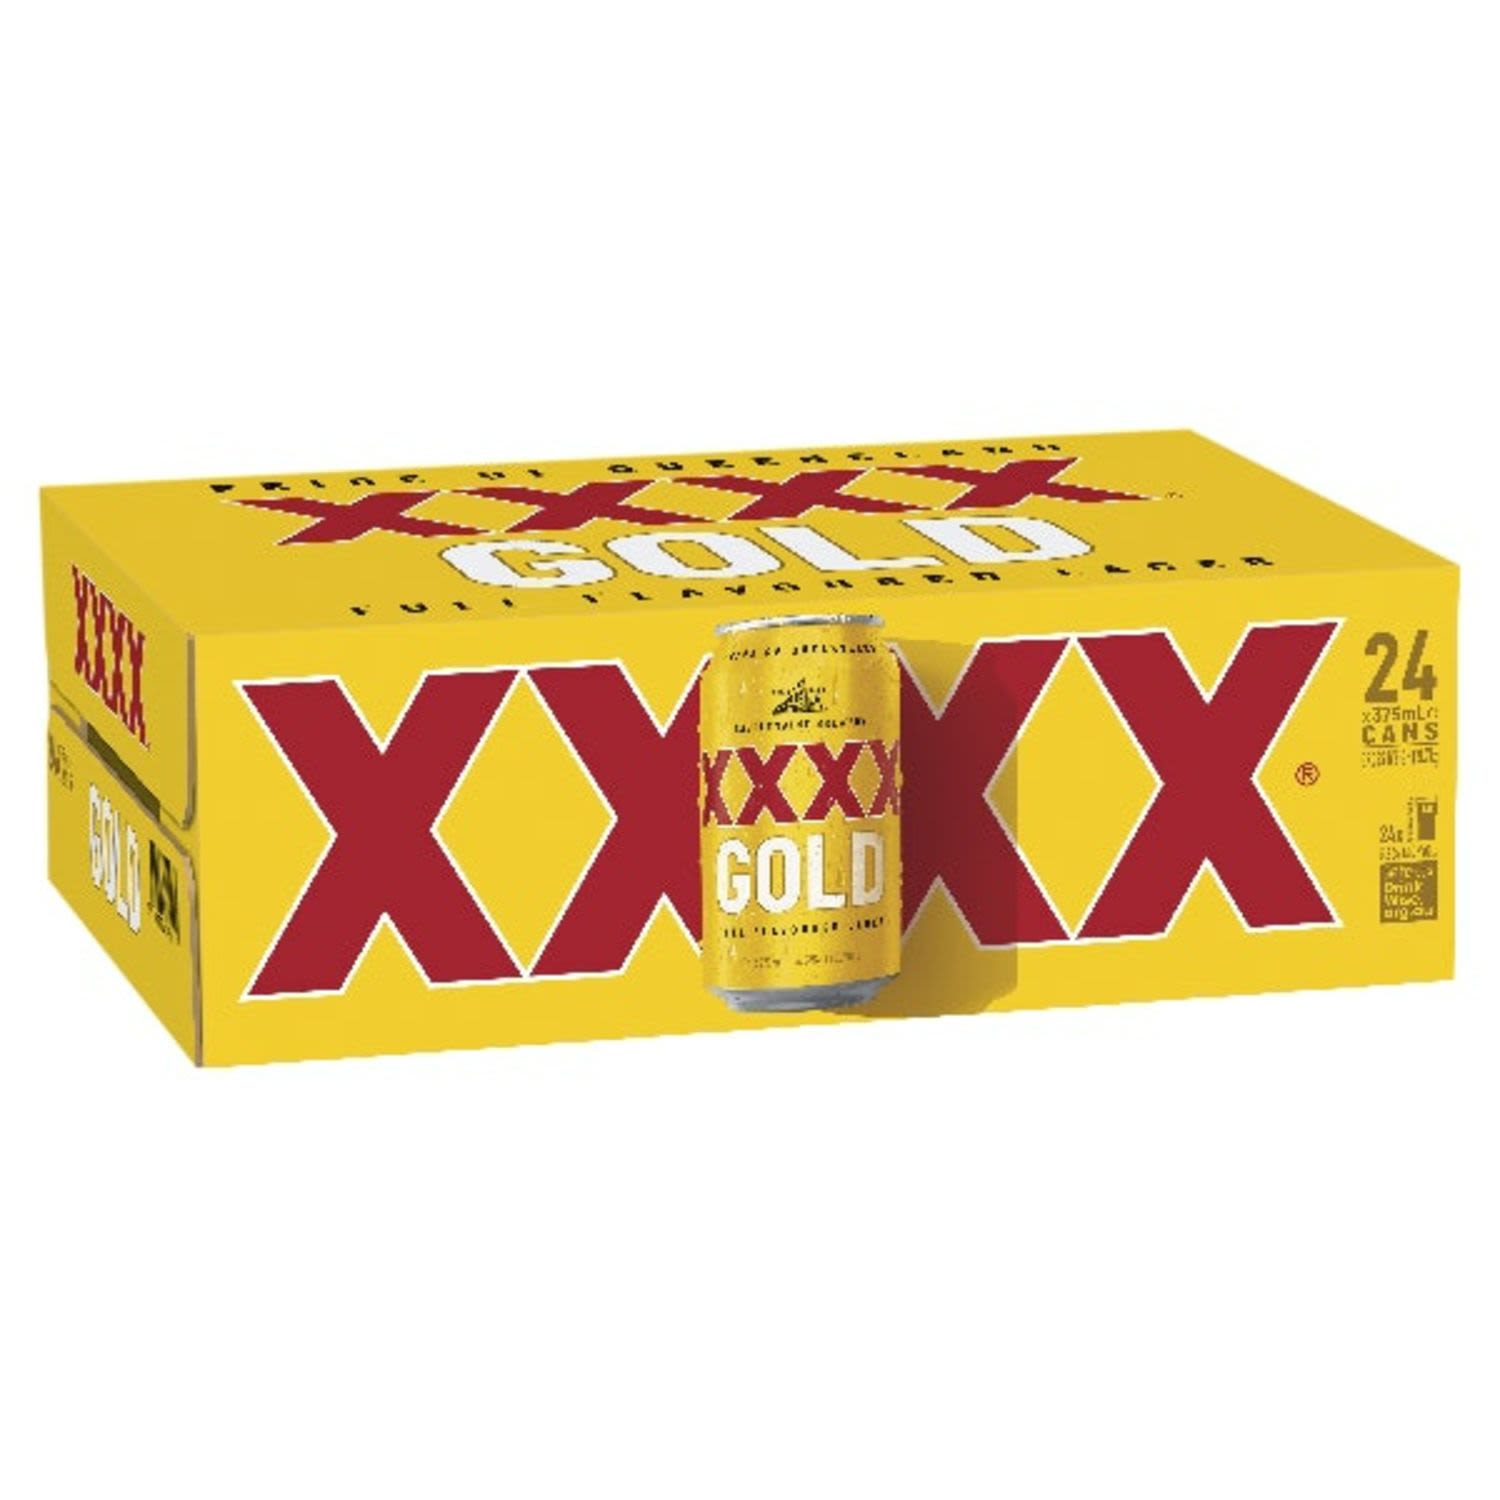 XXXX Gold Can 375mL 24 Pack